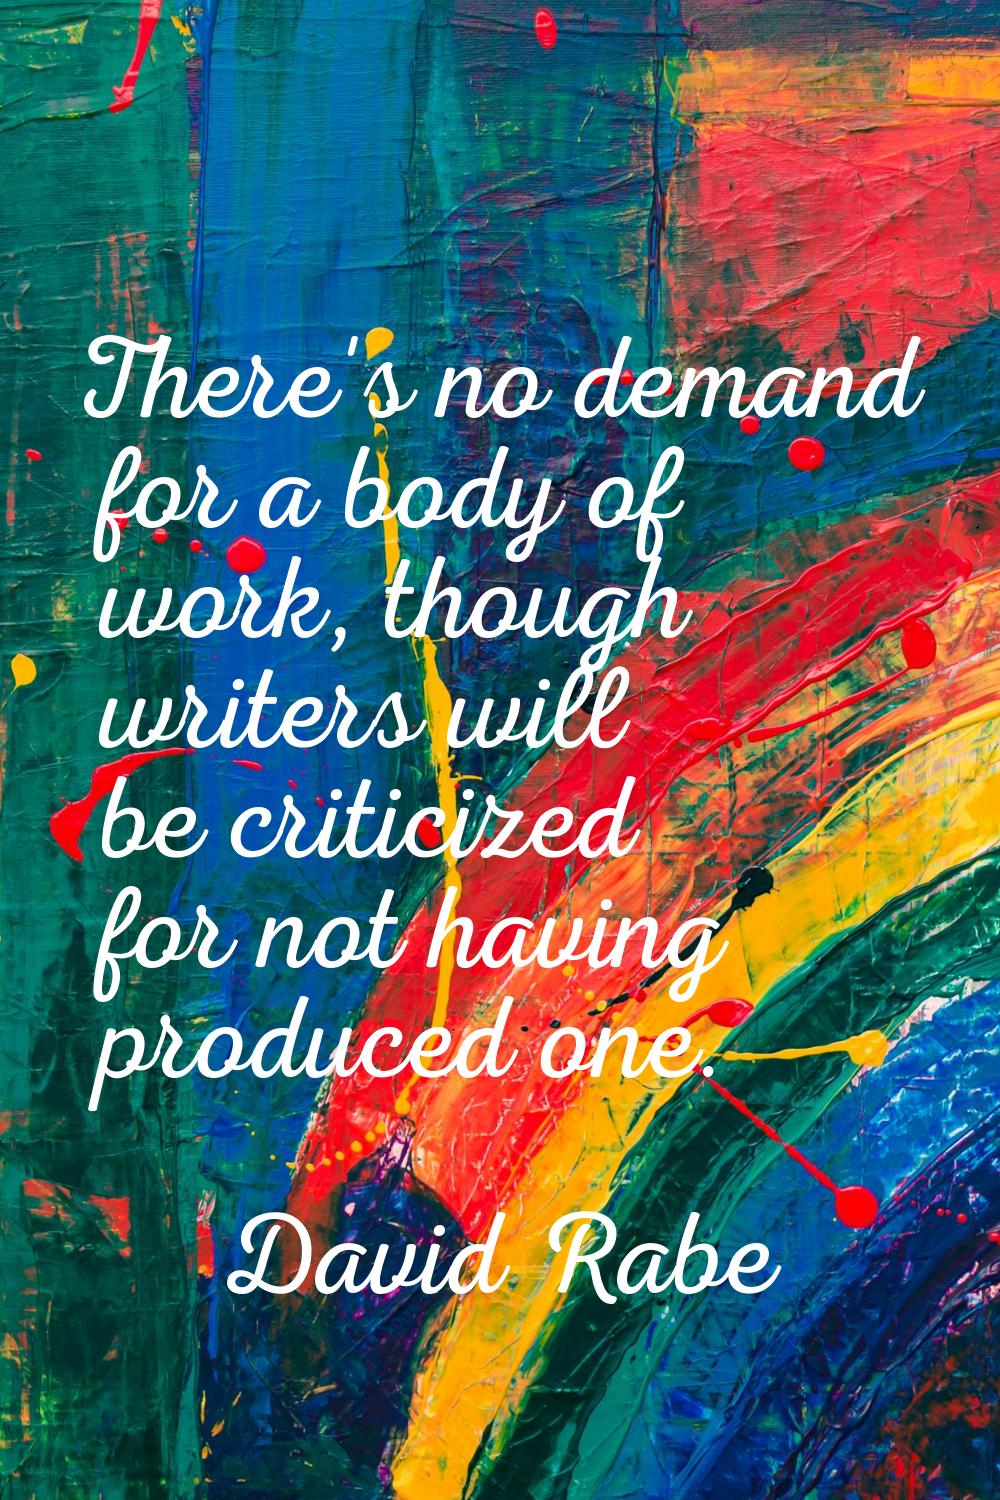 There's no demand for a body of work, though writers will be criticized for not having produced one